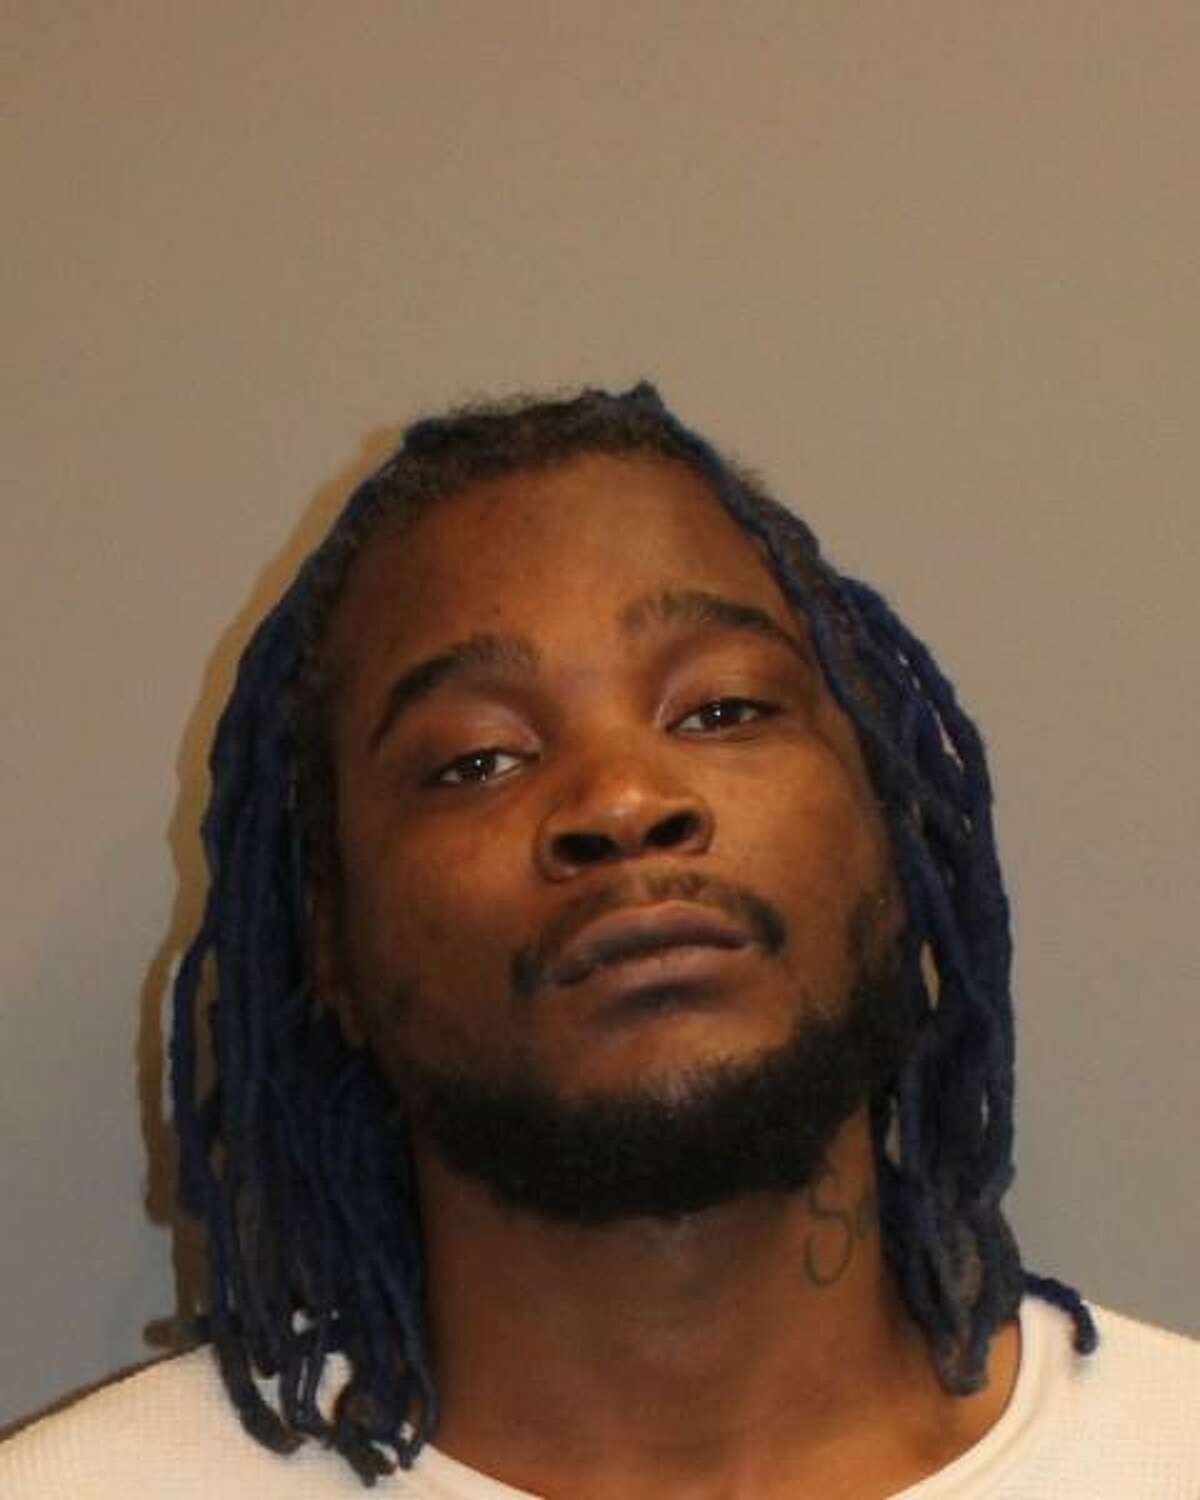 Norwalk police arrested Kimani Williams of Bridgeport on Dec. 27, 2019 for multiple alleged crimes. Among them were illegal firearm possession and firearm theft.